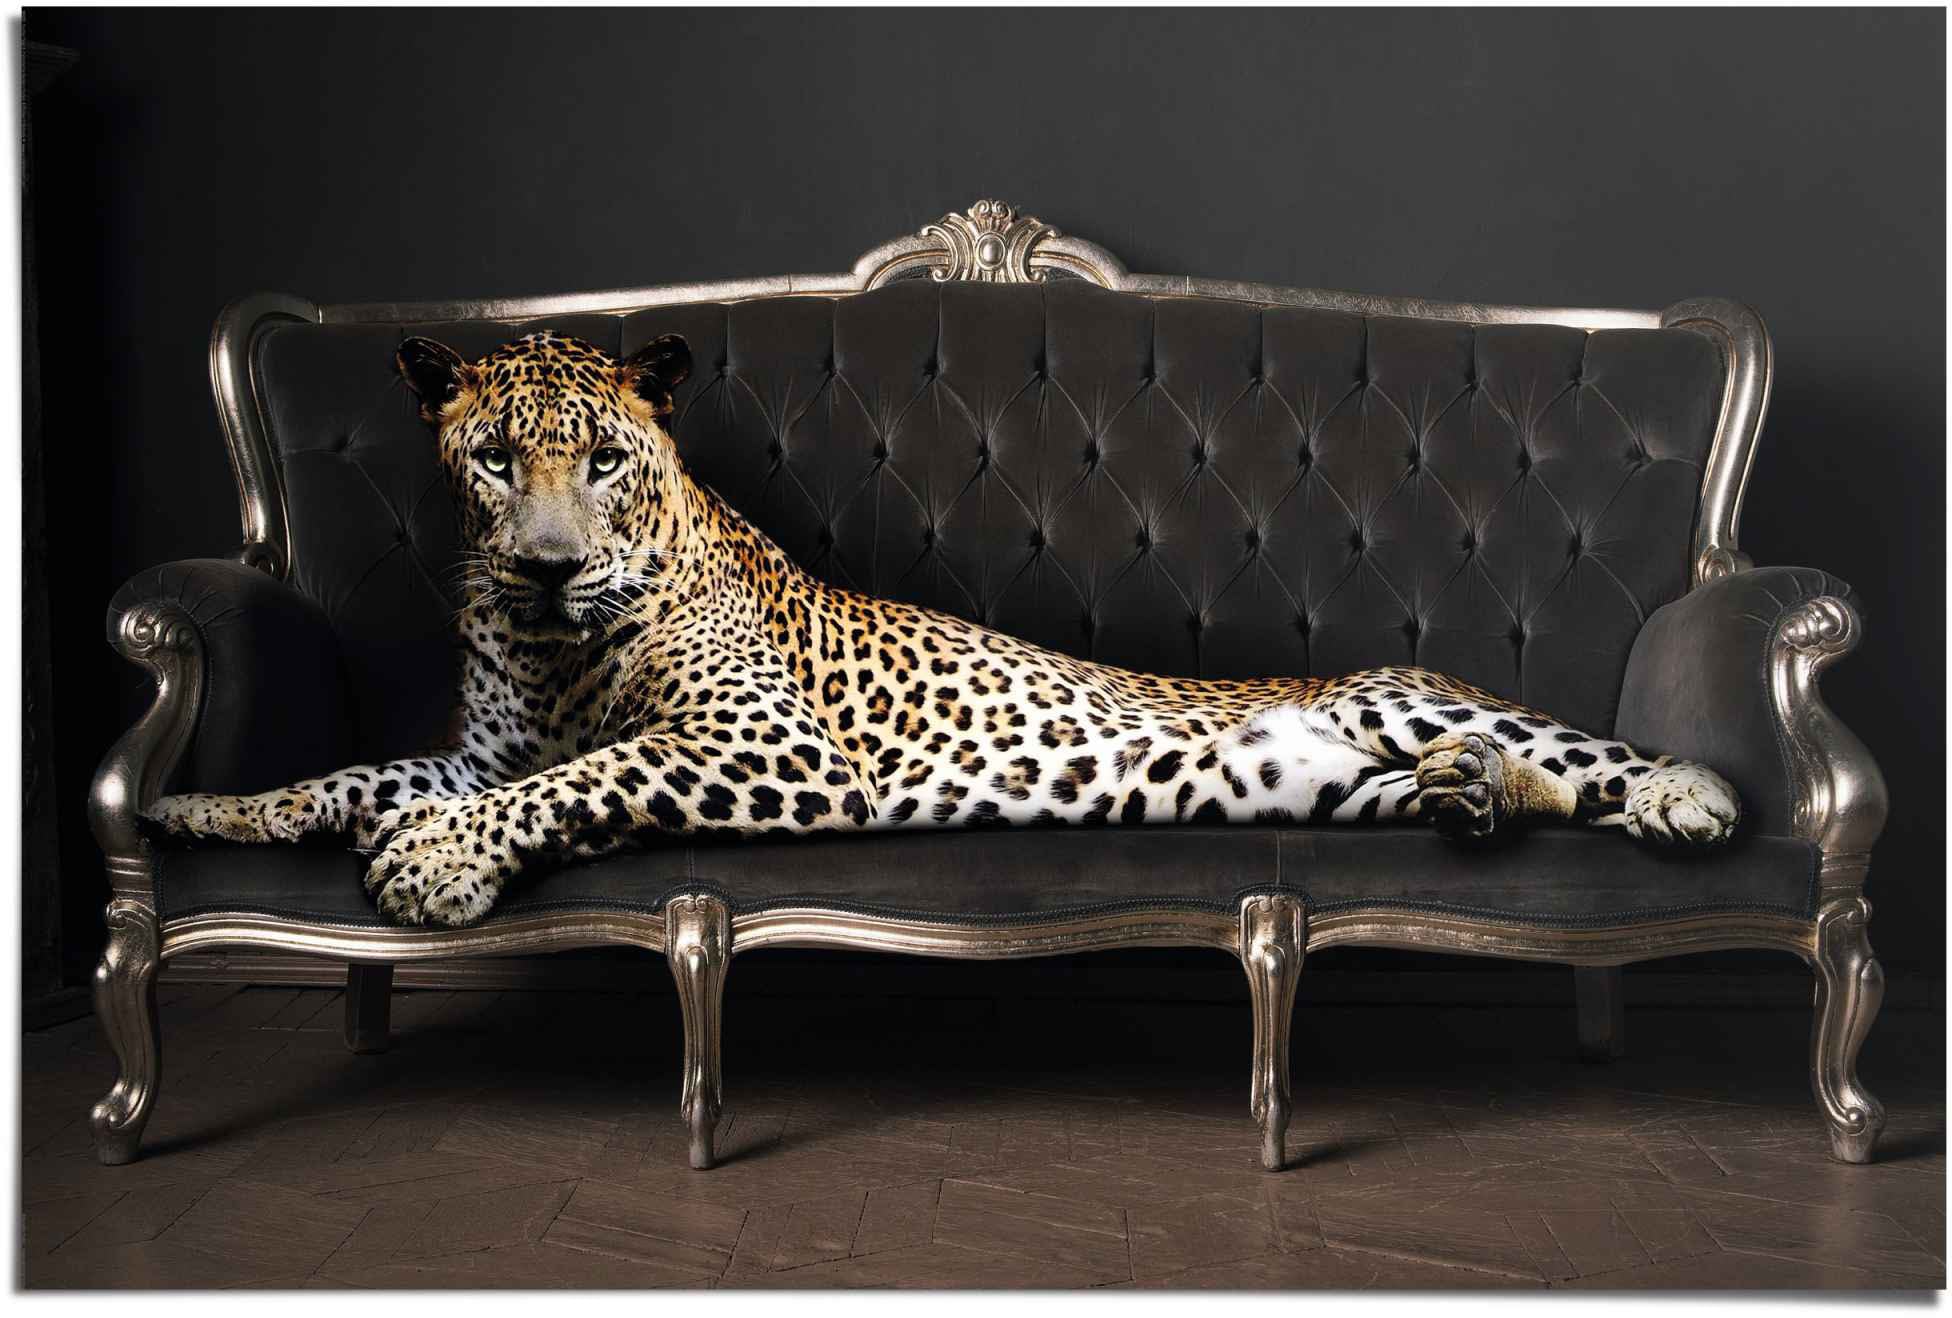 (1 Relax«, Reinders! - OTTO Panther Liegend St.) - Luxus - bei Poster Chic »Leopard